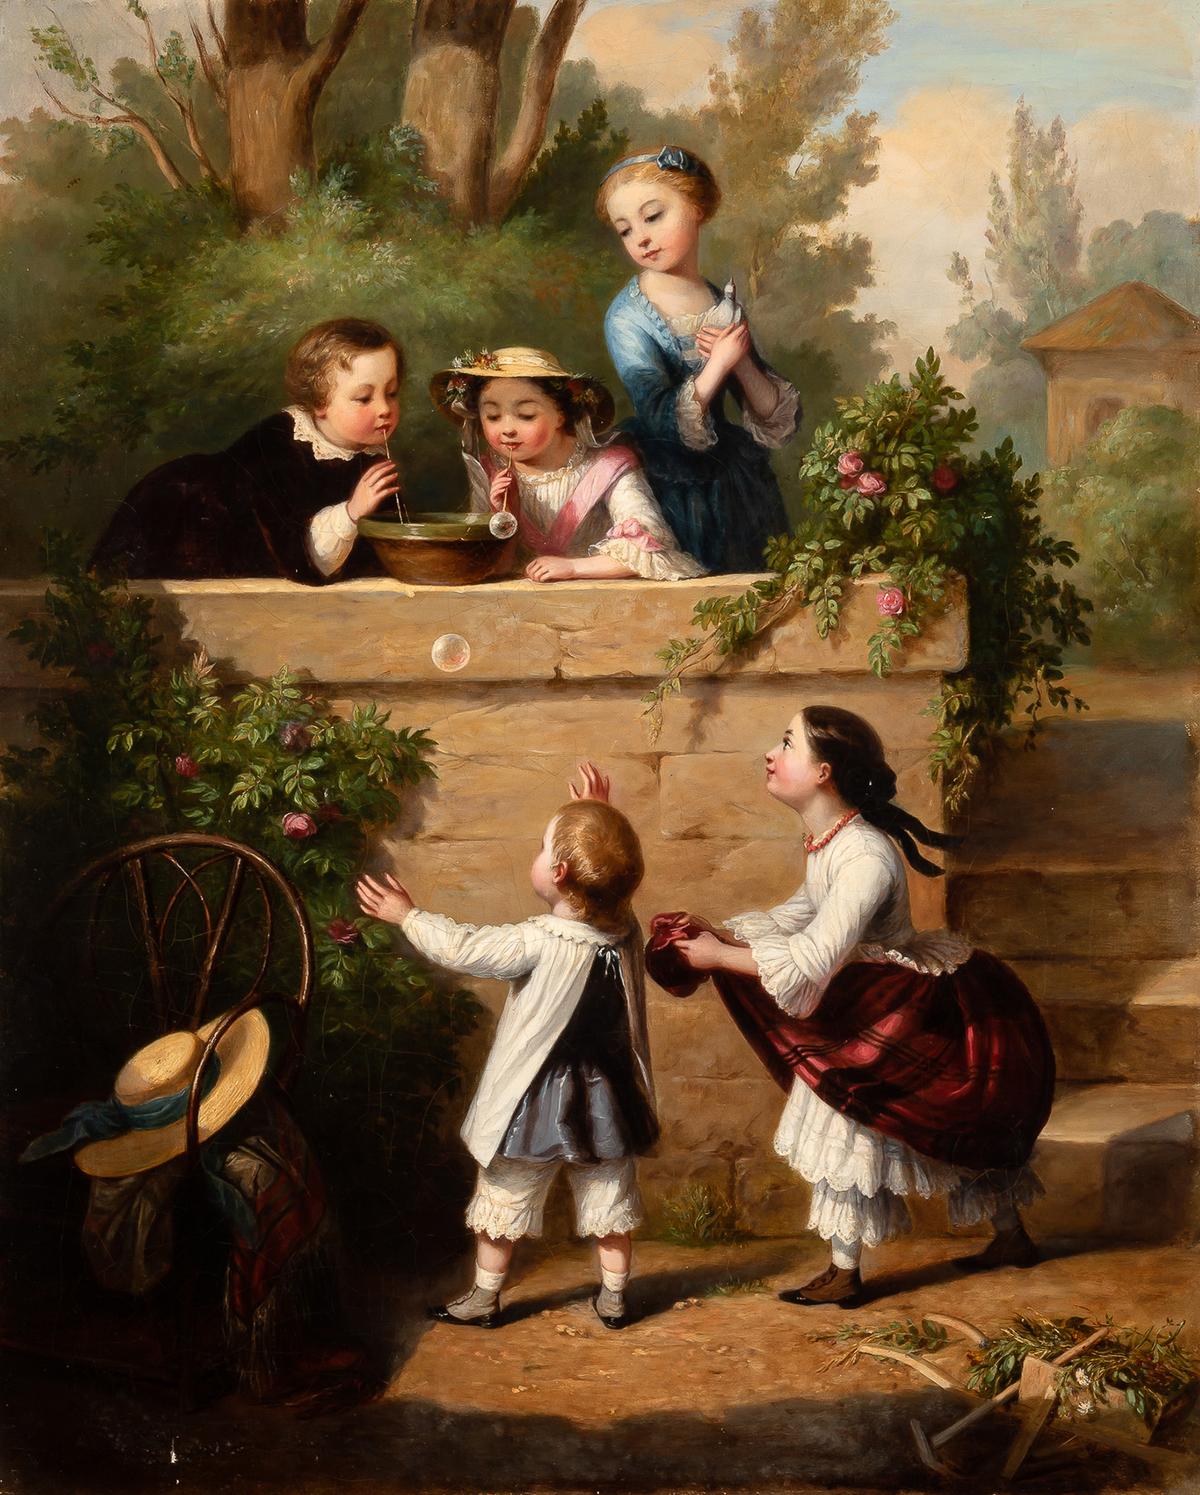 Children blowing bubbles, circa 1840–1860, attributed to Clara Nargeot. Oil on canvas. Private collection. (Public Domain)